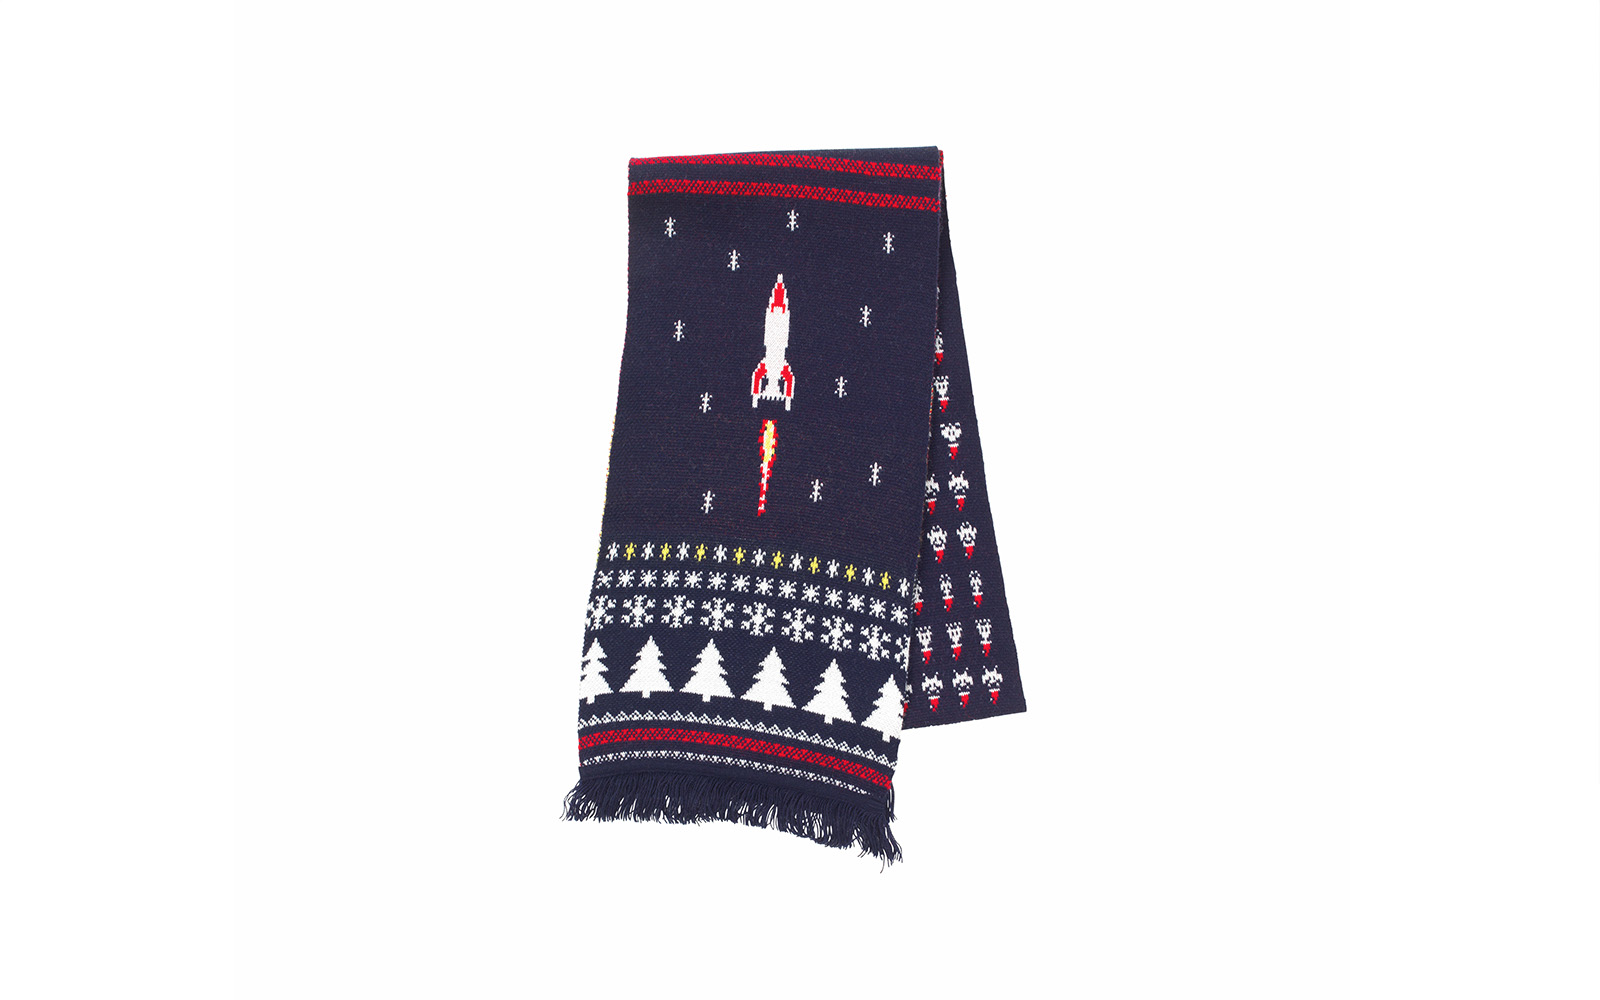 https://www.markchampkins.com/wp-content/uploads/2019/04/Sci-Xmas-scarf-Space-Inv1.jpg